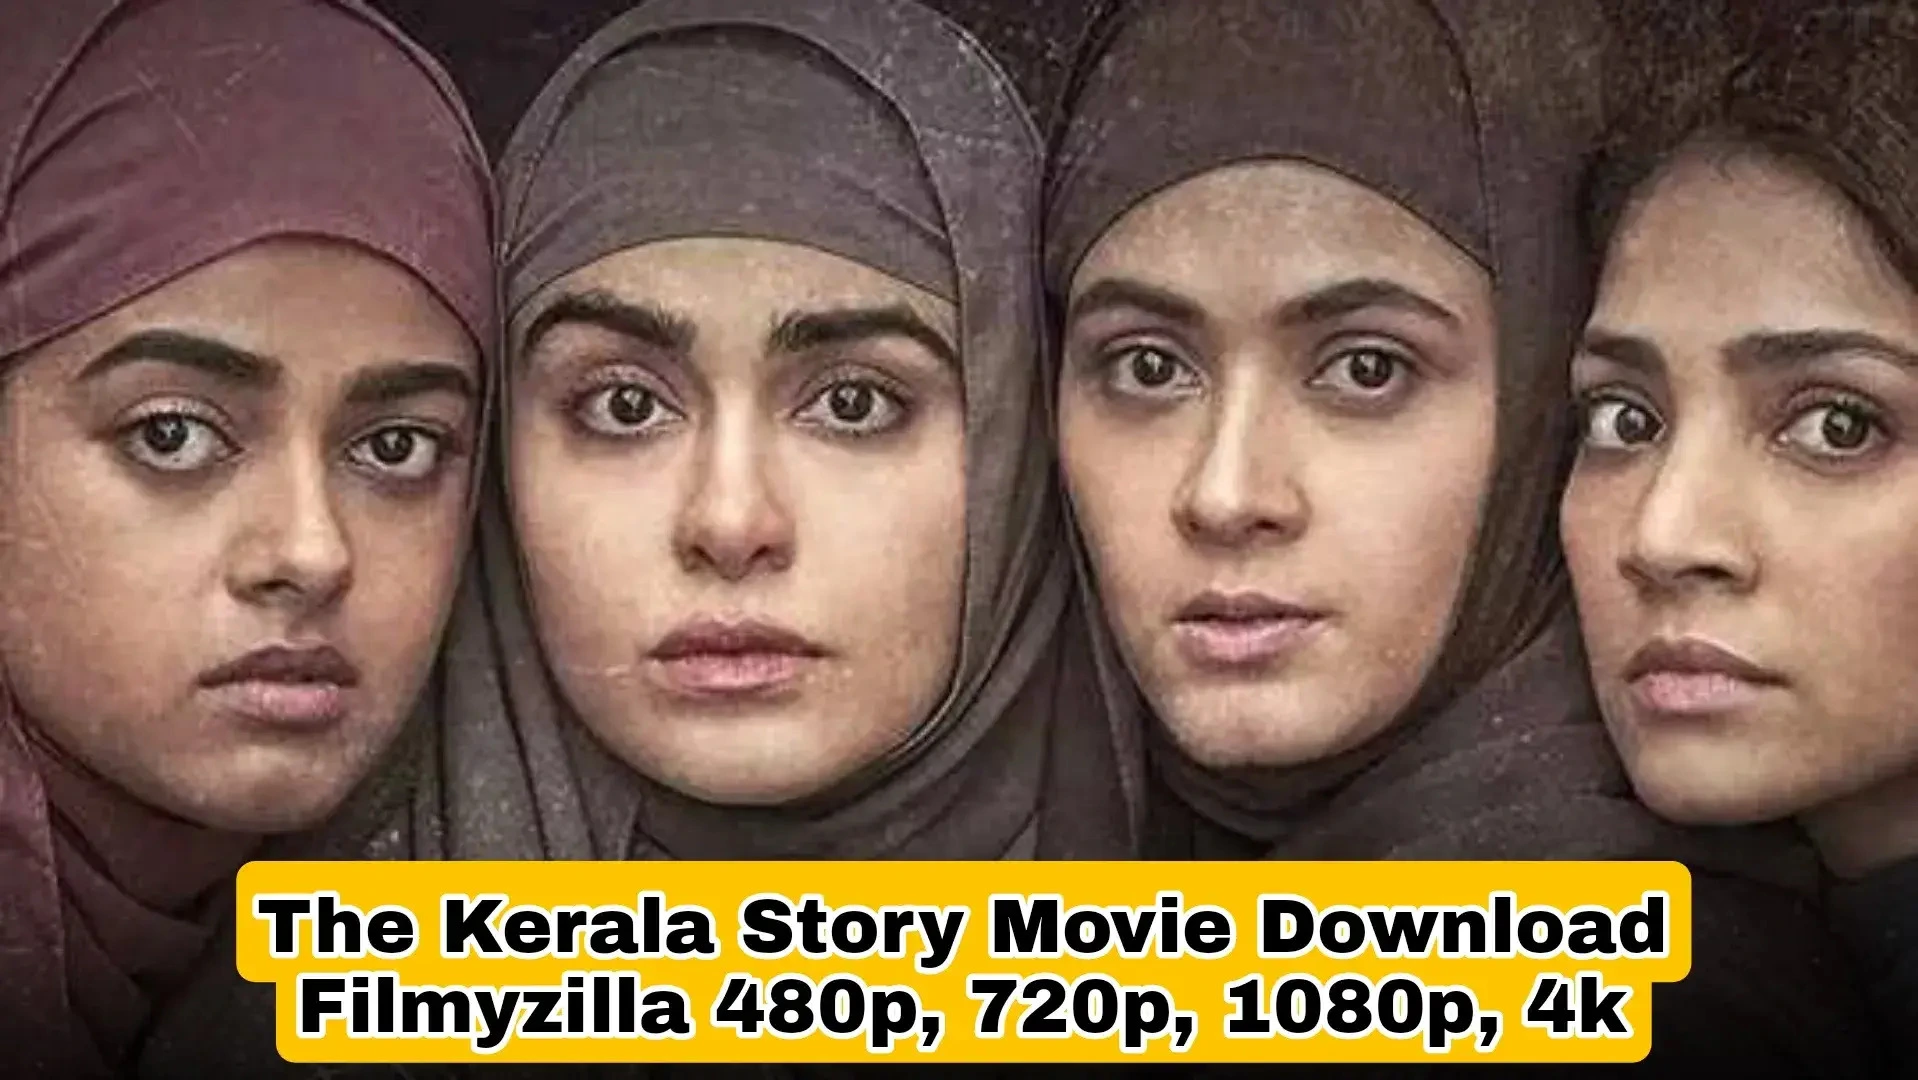 Download The Kerala Story Movie